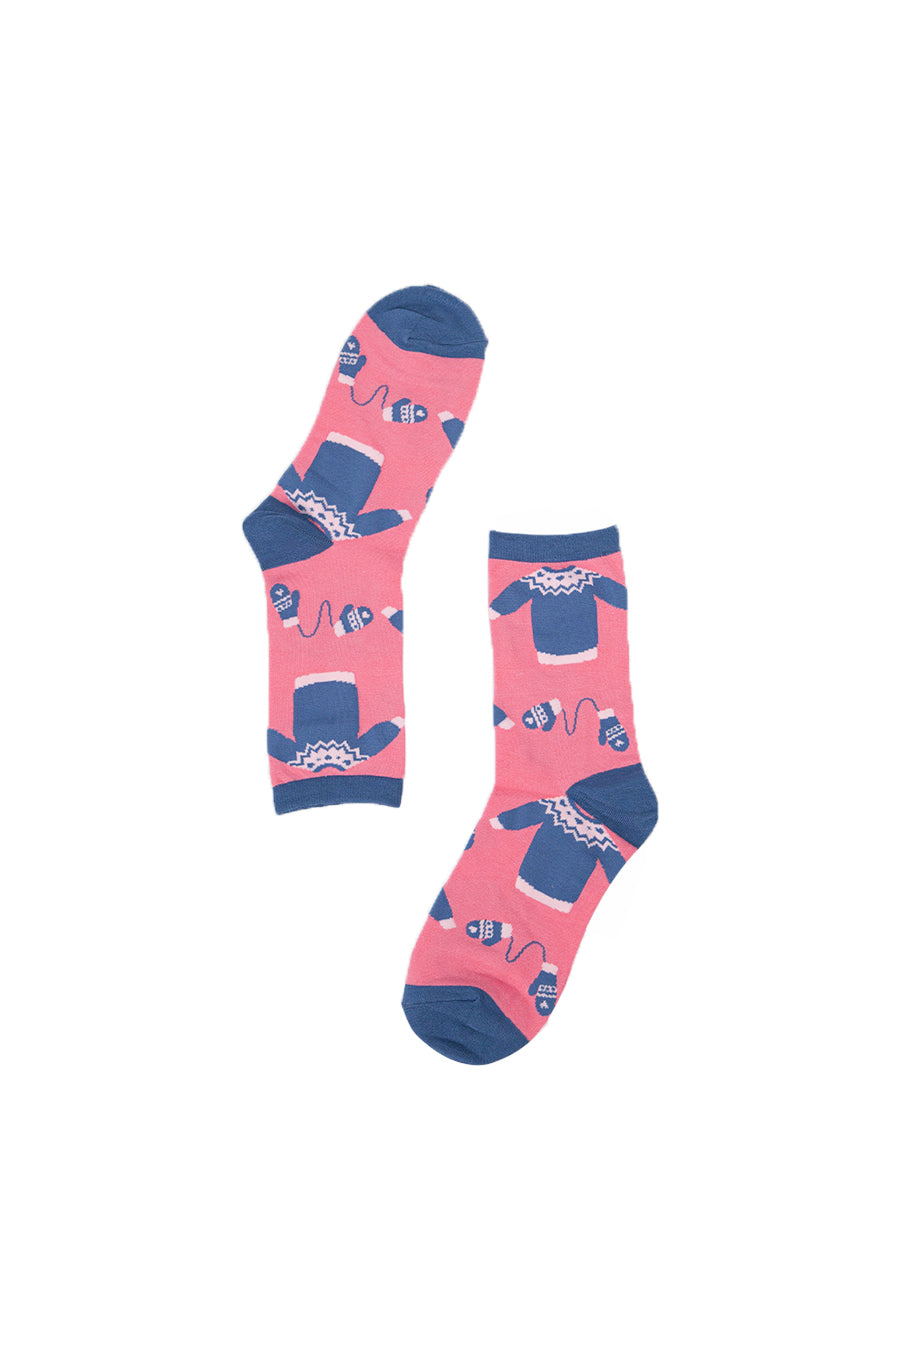 pink and blue ankle socks with Christmas sweaters and winter gloves on them